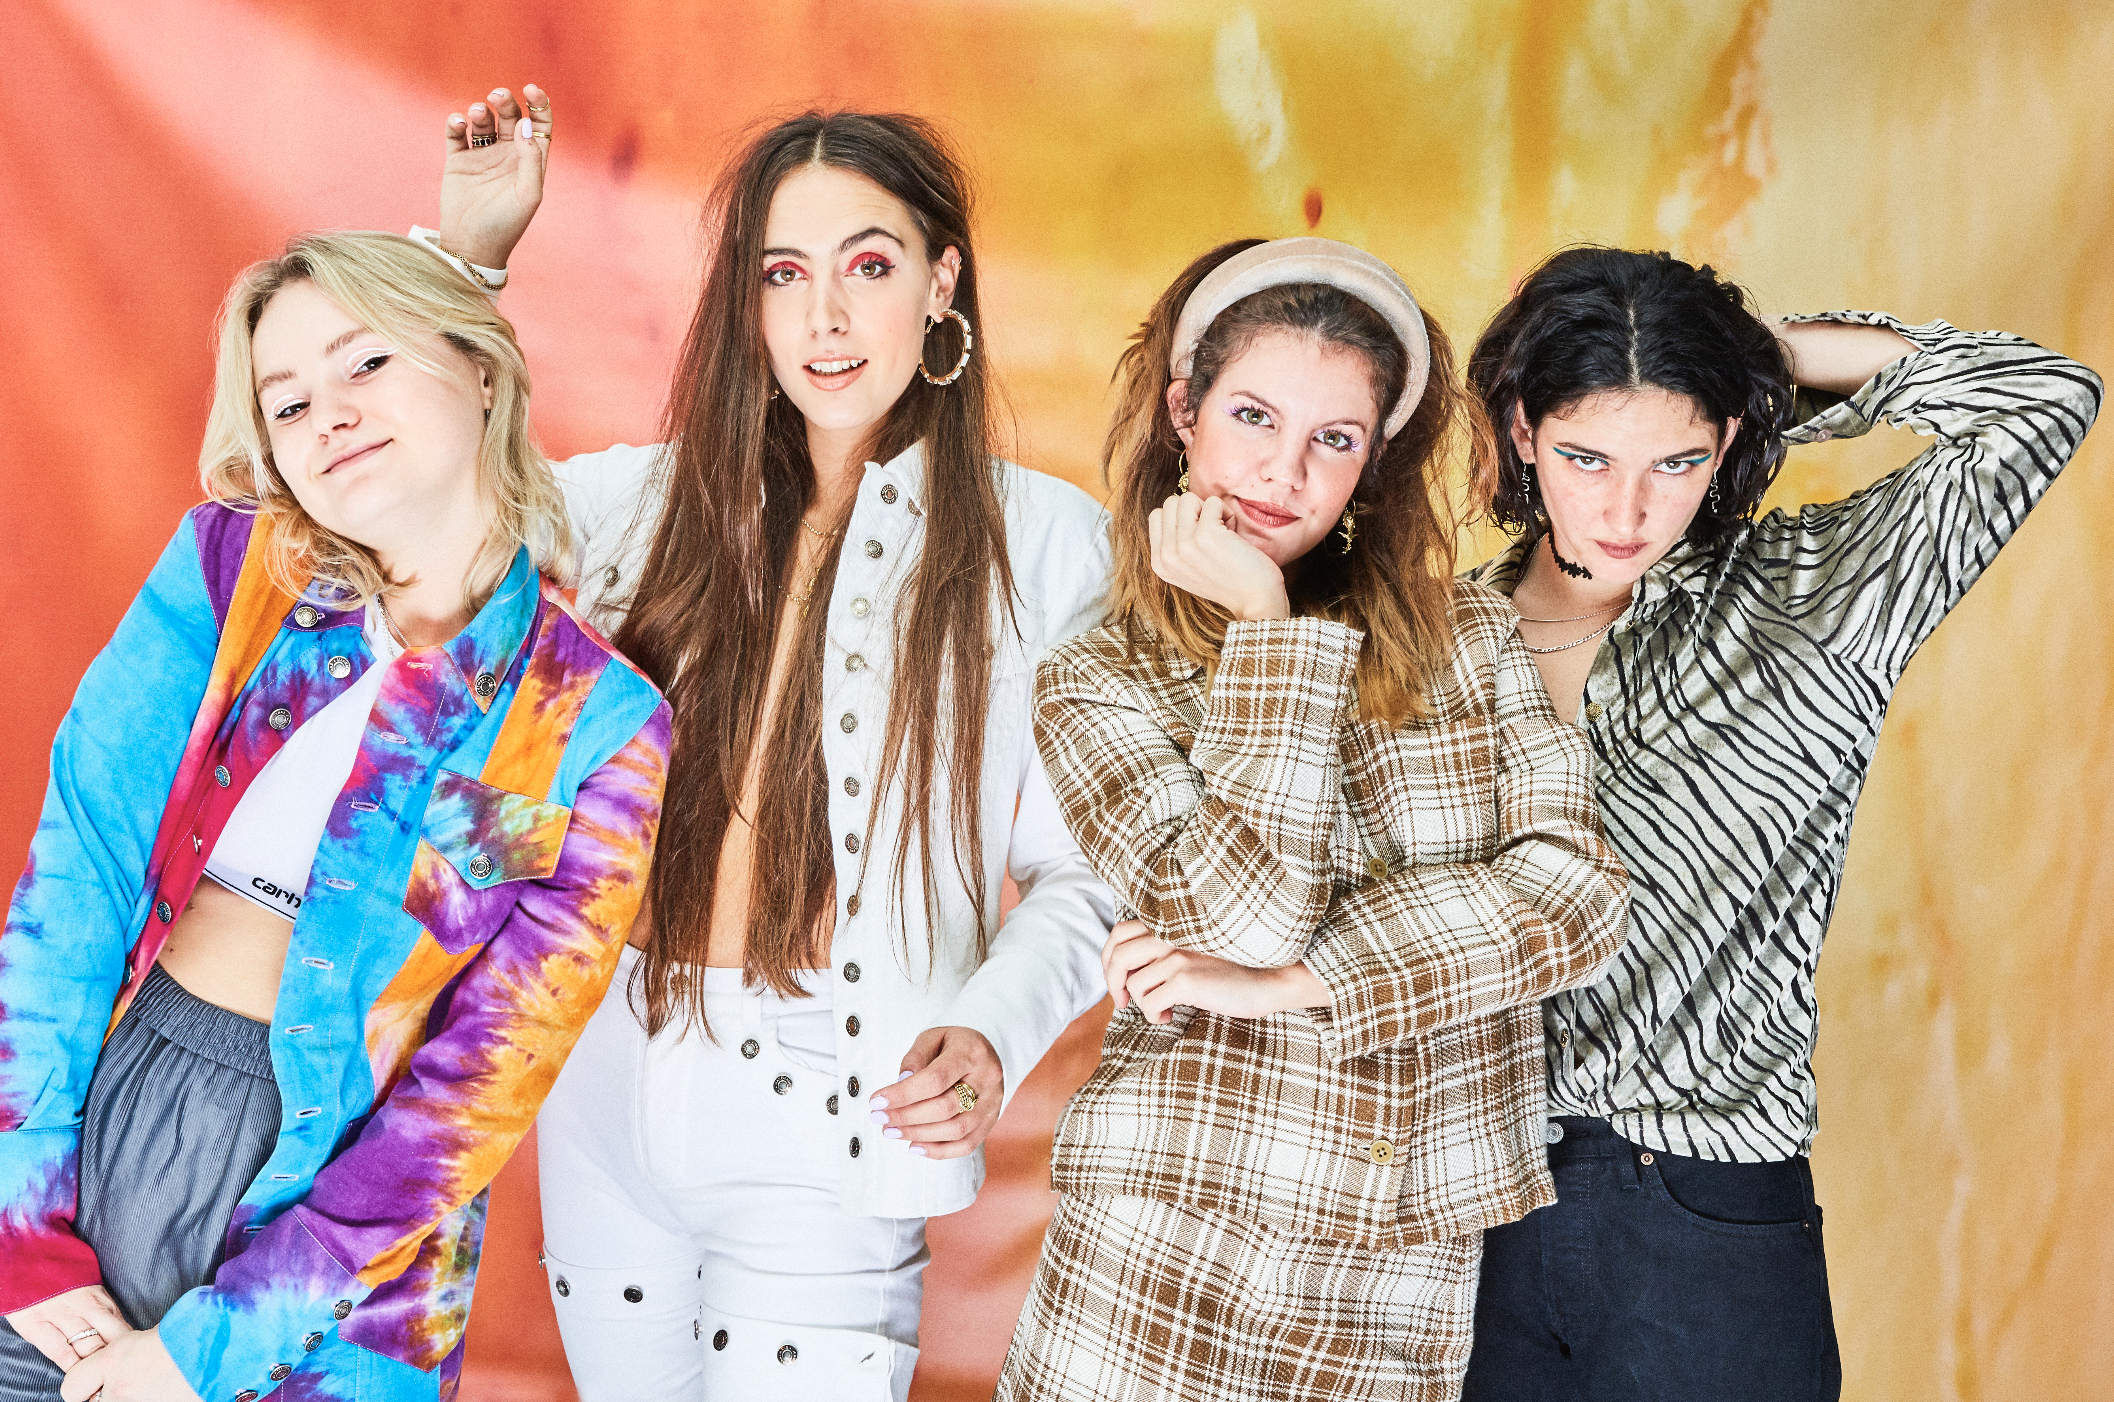 HINDS – The Prettiest Curse